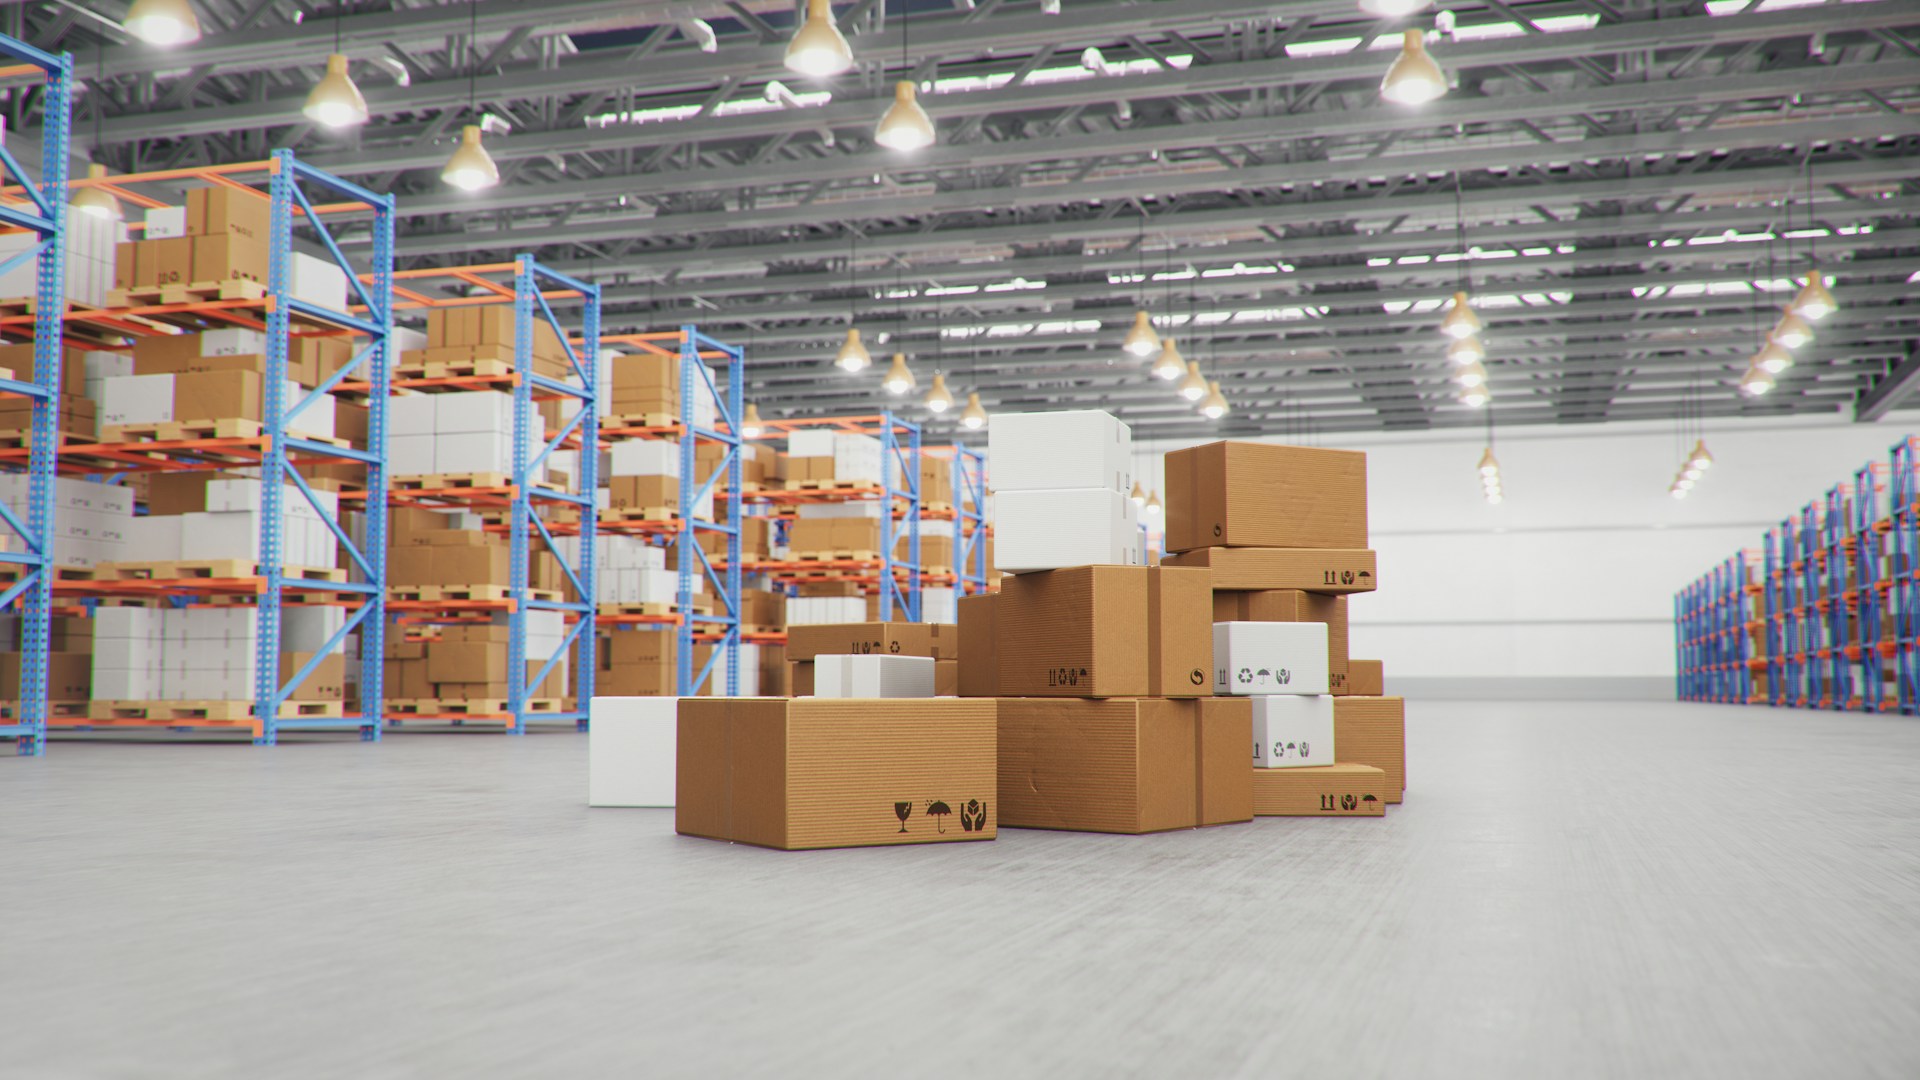 A strategy that is rapidly gaining traction is small parcel consolidation. By understanding this and implementing it effectively, businesses can save money.